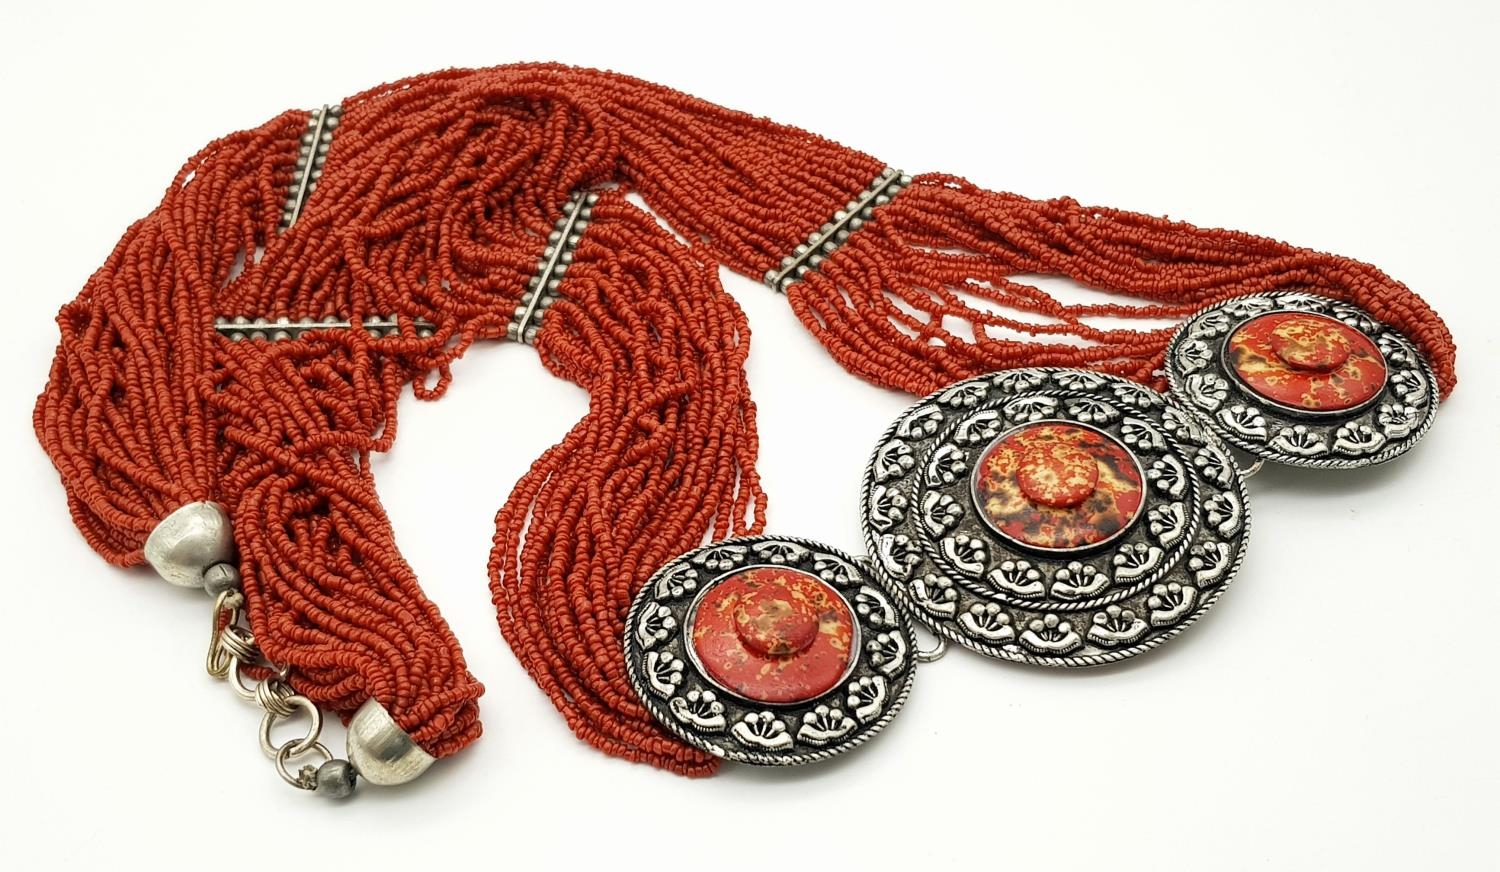 A Statement Multi-Strand Coral Necklace with a Trio of Discs. 1m length, 241.20g total weight. - Image 3 of 5